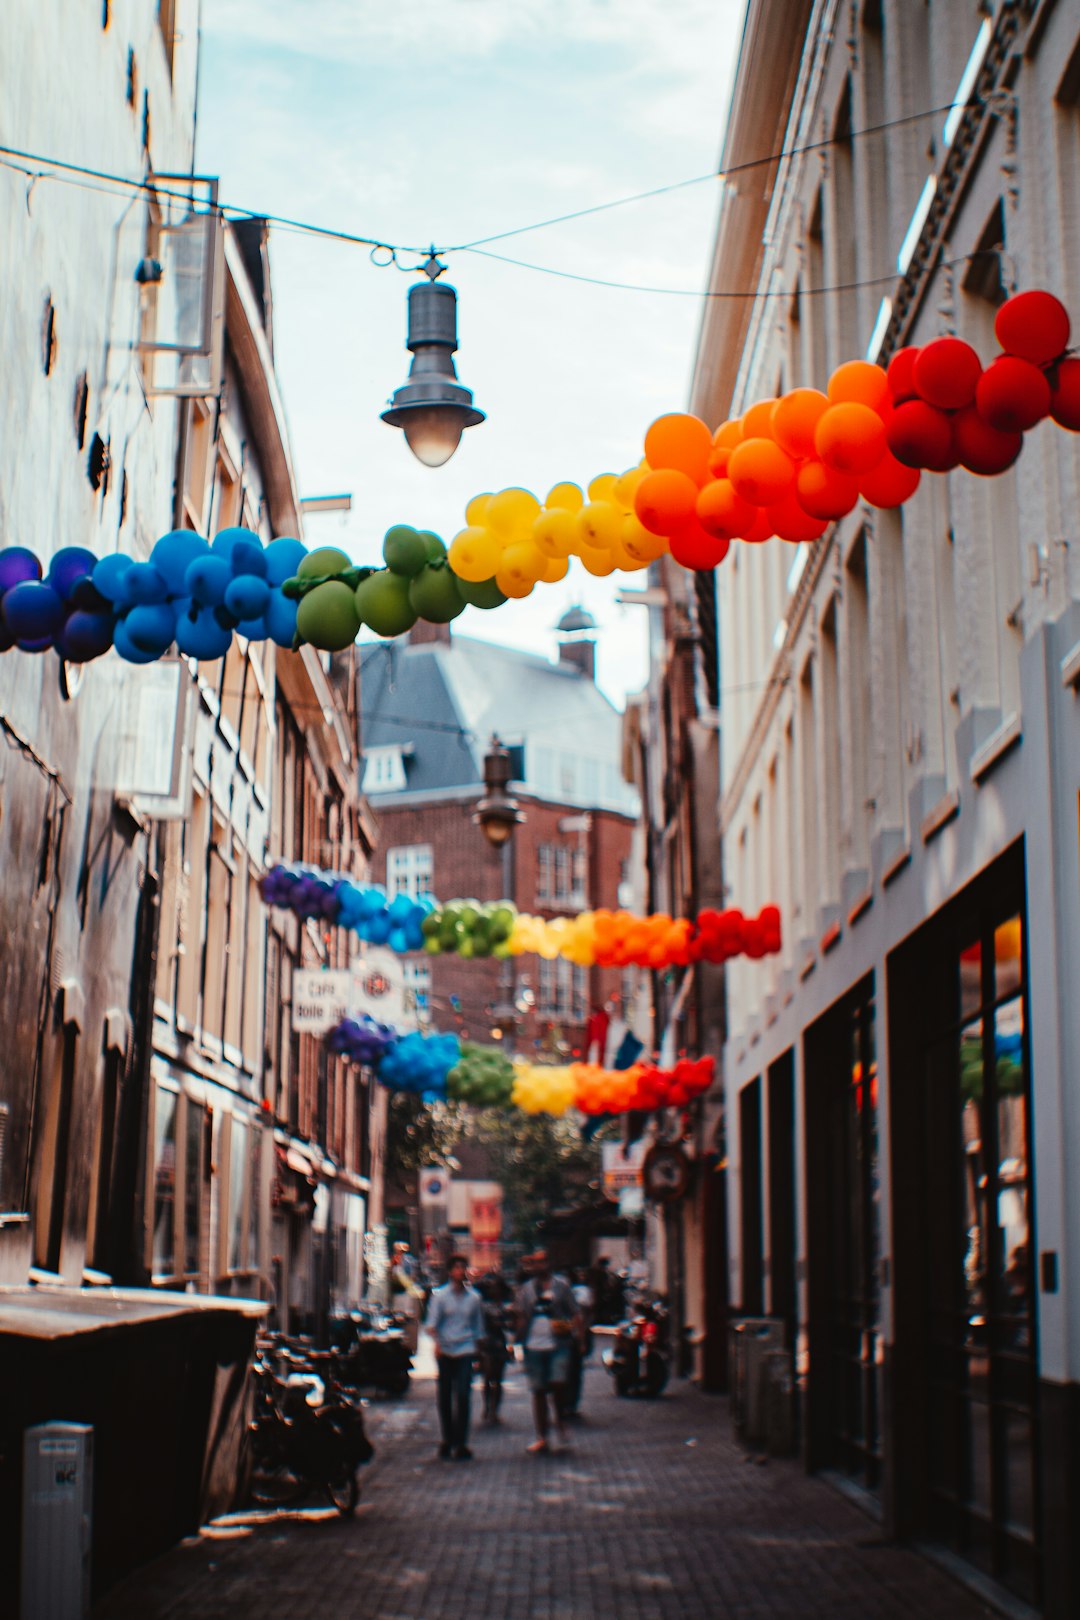 pathway with balloons